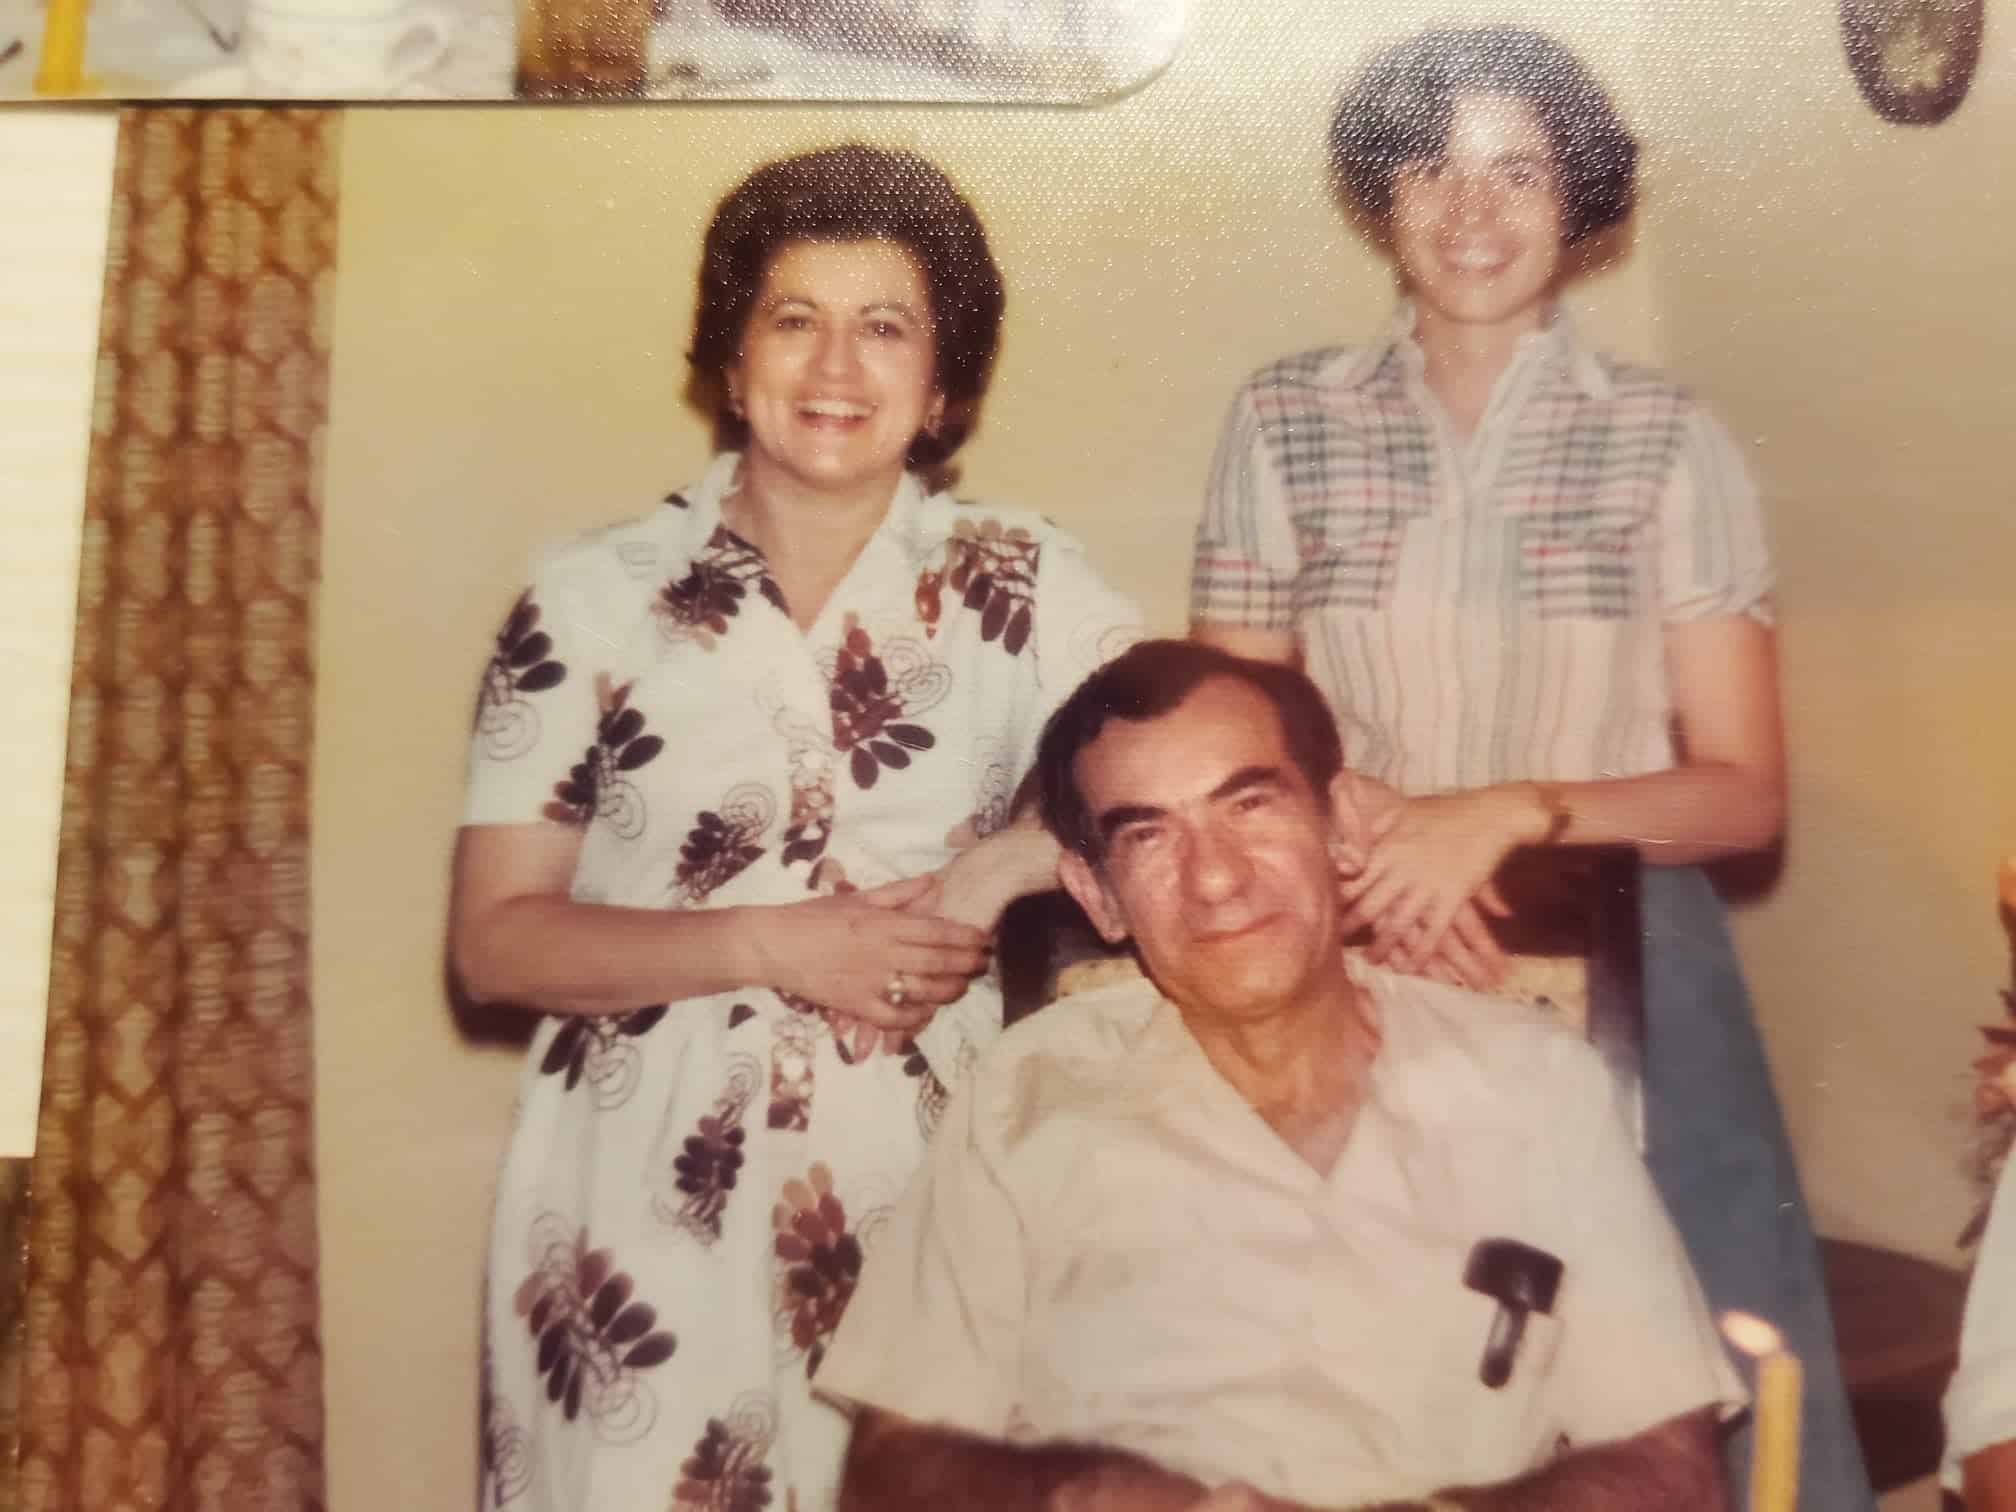 Three generations of Latine-Americans: my grandmother Yolanda Estevez Saras, my Puerto Rican grandfather Fred Saras, and my mother Susan Saras as a young adult.